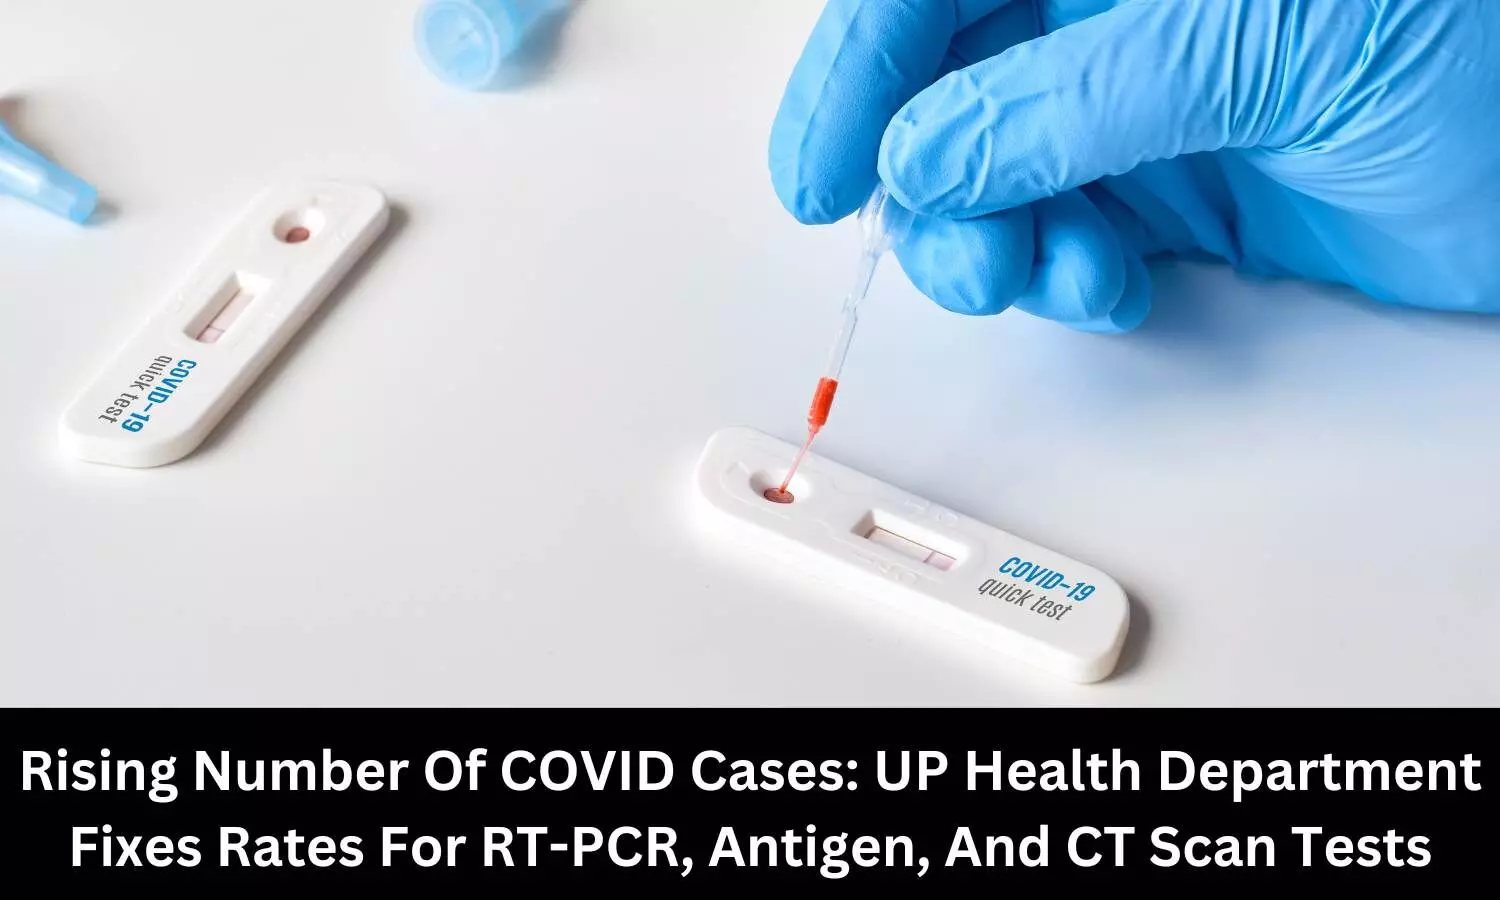 UP Health Department fixes rates of COVID tests at private pathology, diagnostic centres